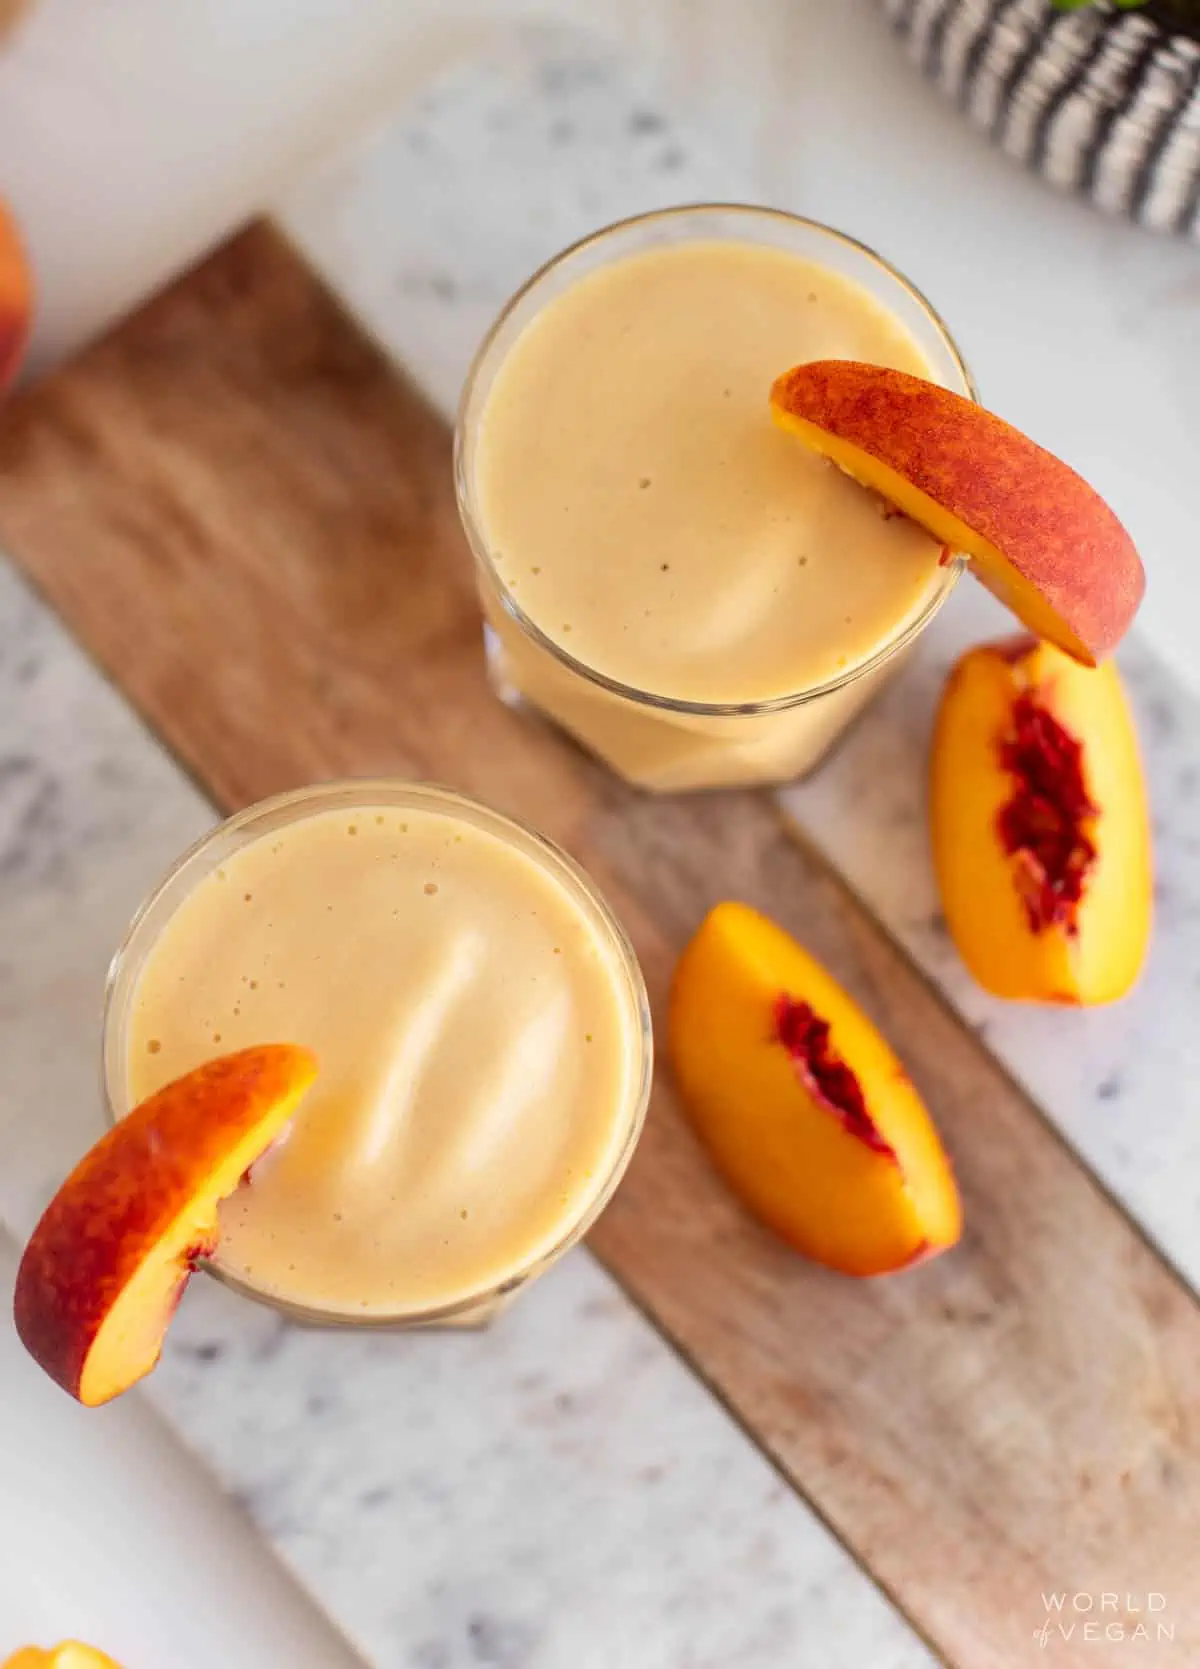 Overhead view of two glasses of peach banana smoothie, serve with fresh peach slices.